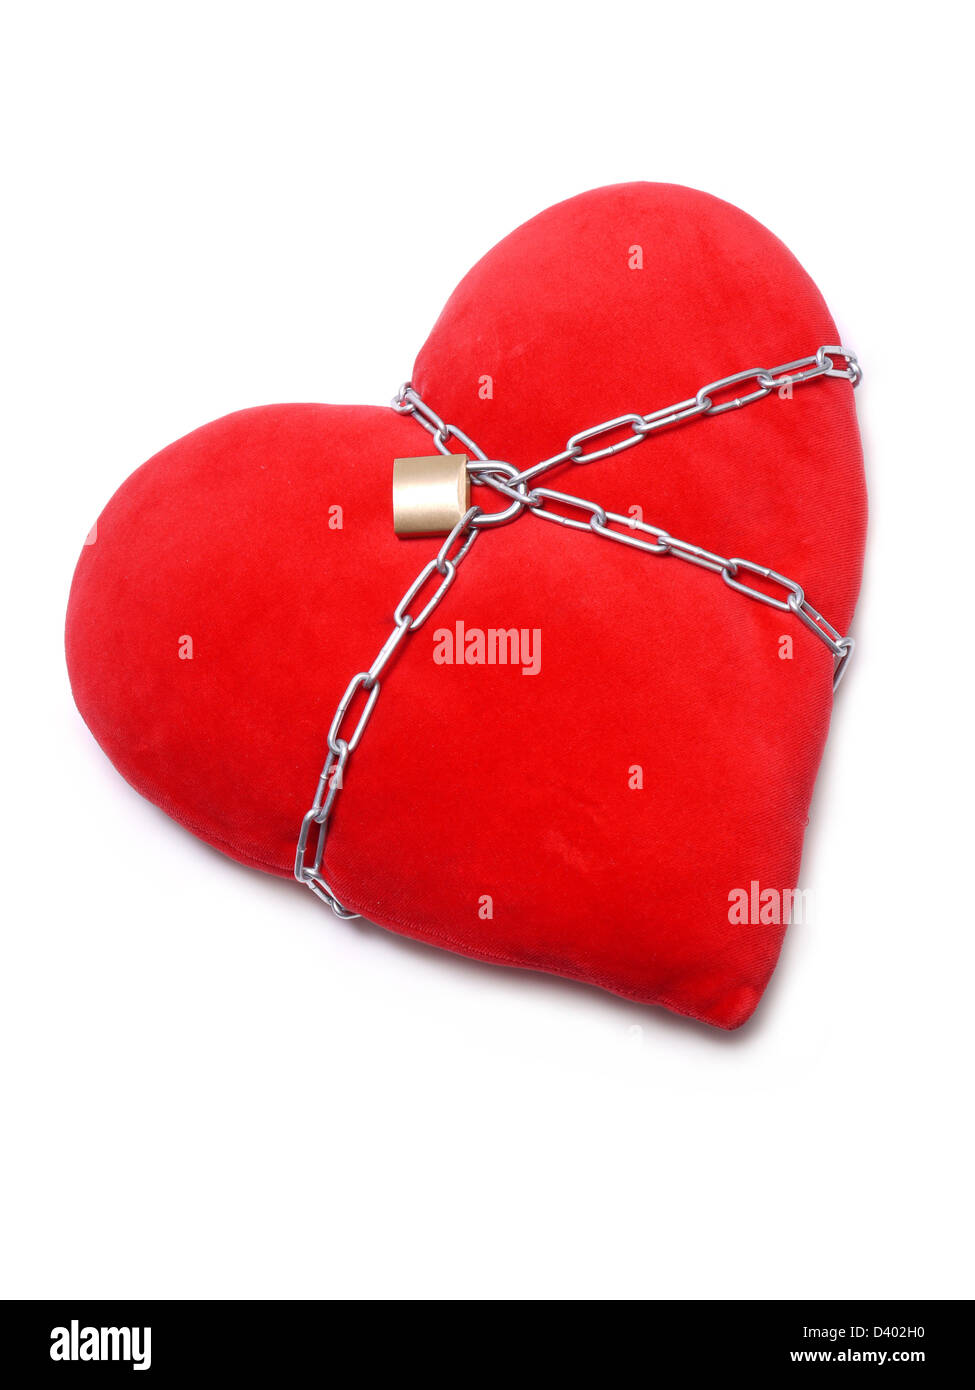 Chained red heart-shaped pillow over white background Stock Photo